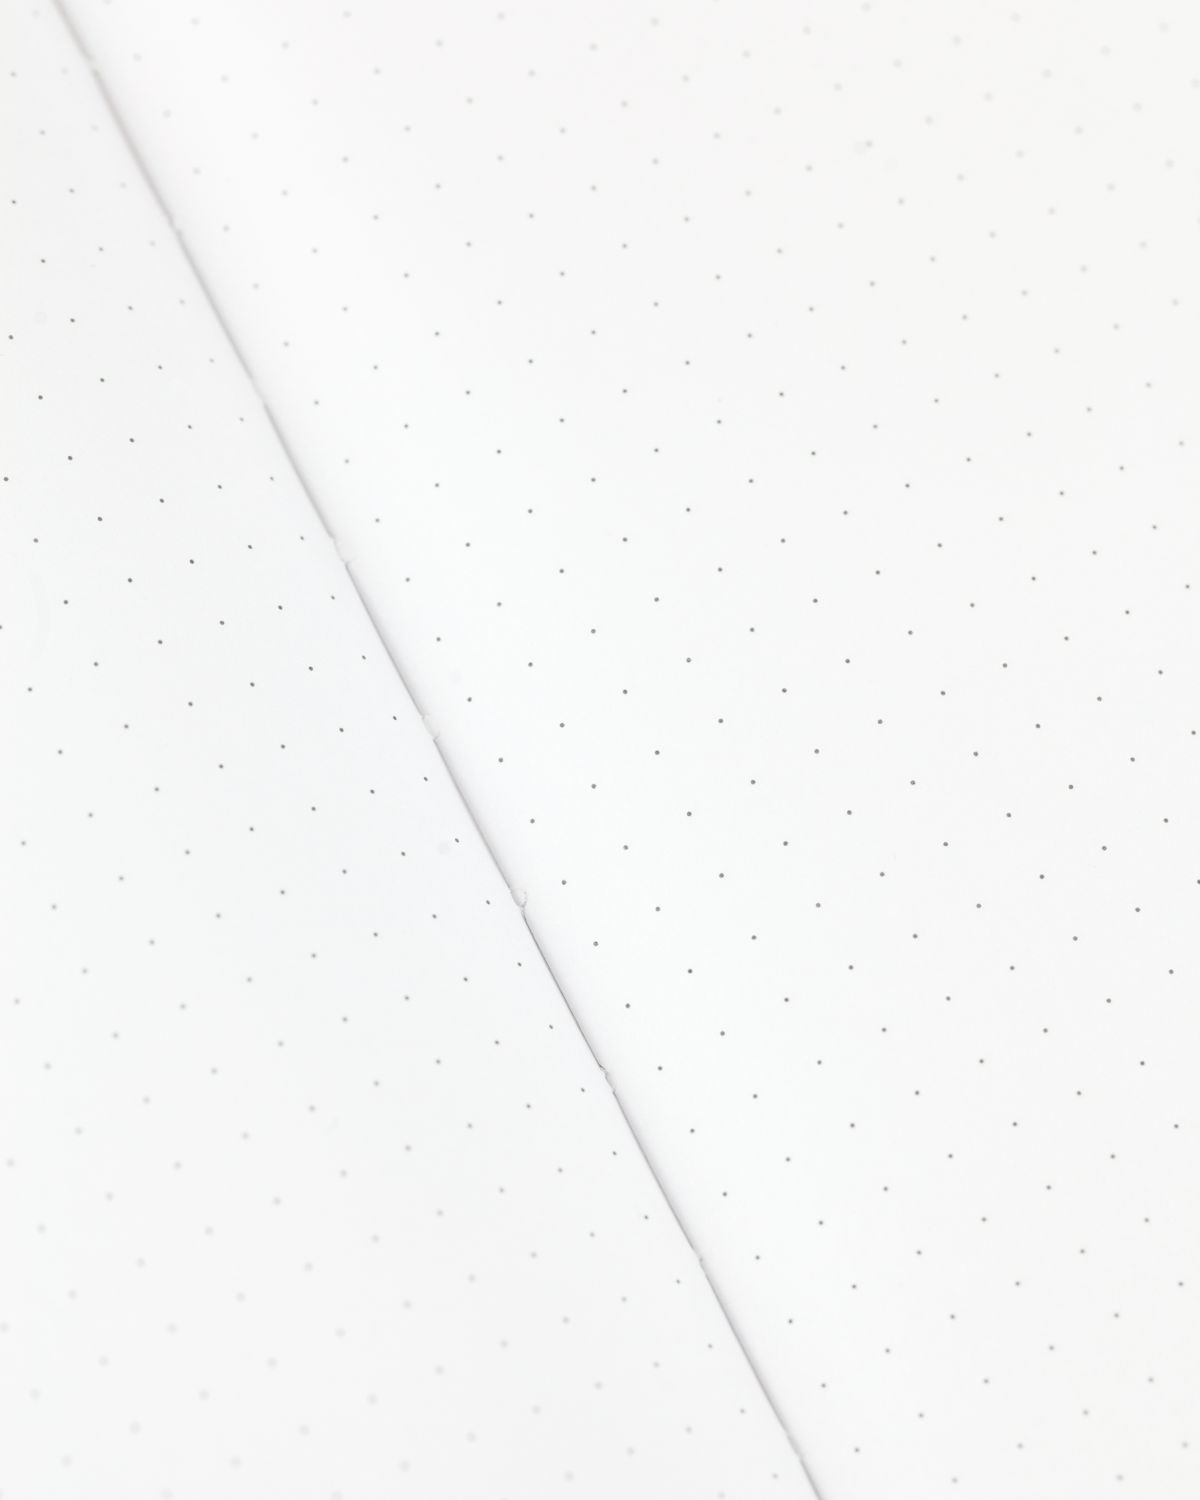 100% recycled paper, 81 gsm, dot grid pages, Cognitive Surplus